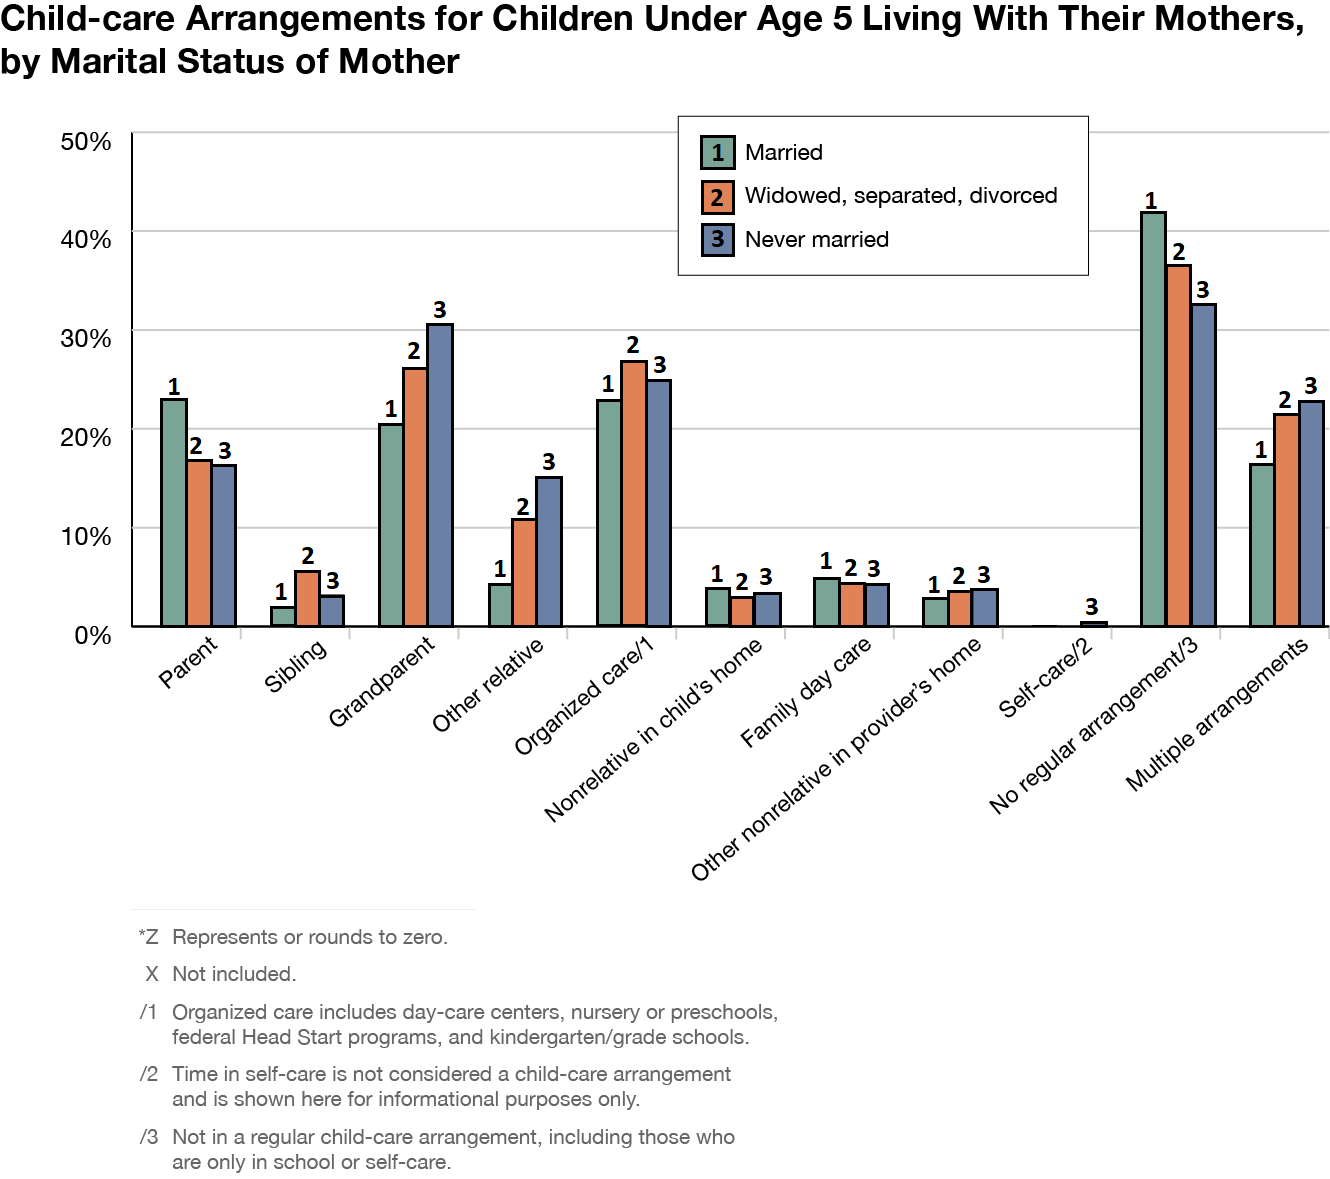 Child-care arrangements for children under age 5 living with their mothers, by marital status of mother. To find the details on the graph please press Image description link below it.